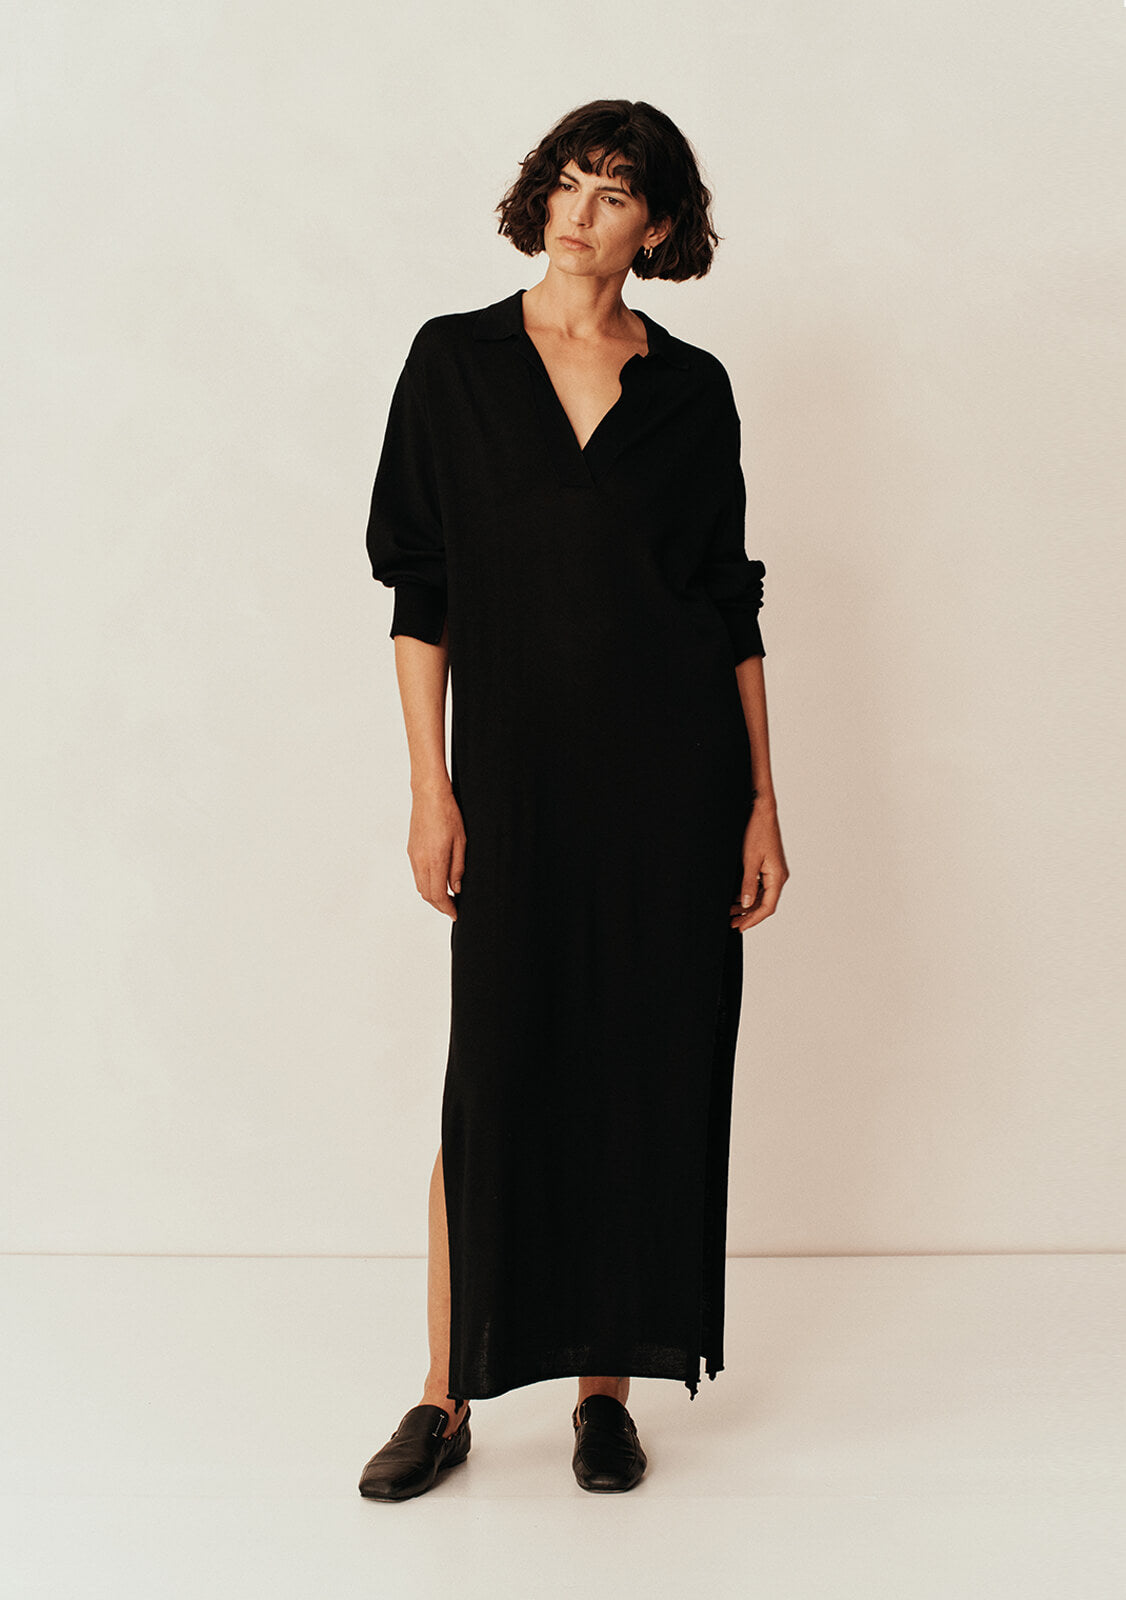 Esse Amor Collared Knit Dress in Black available at TNT The New Trend Australia.